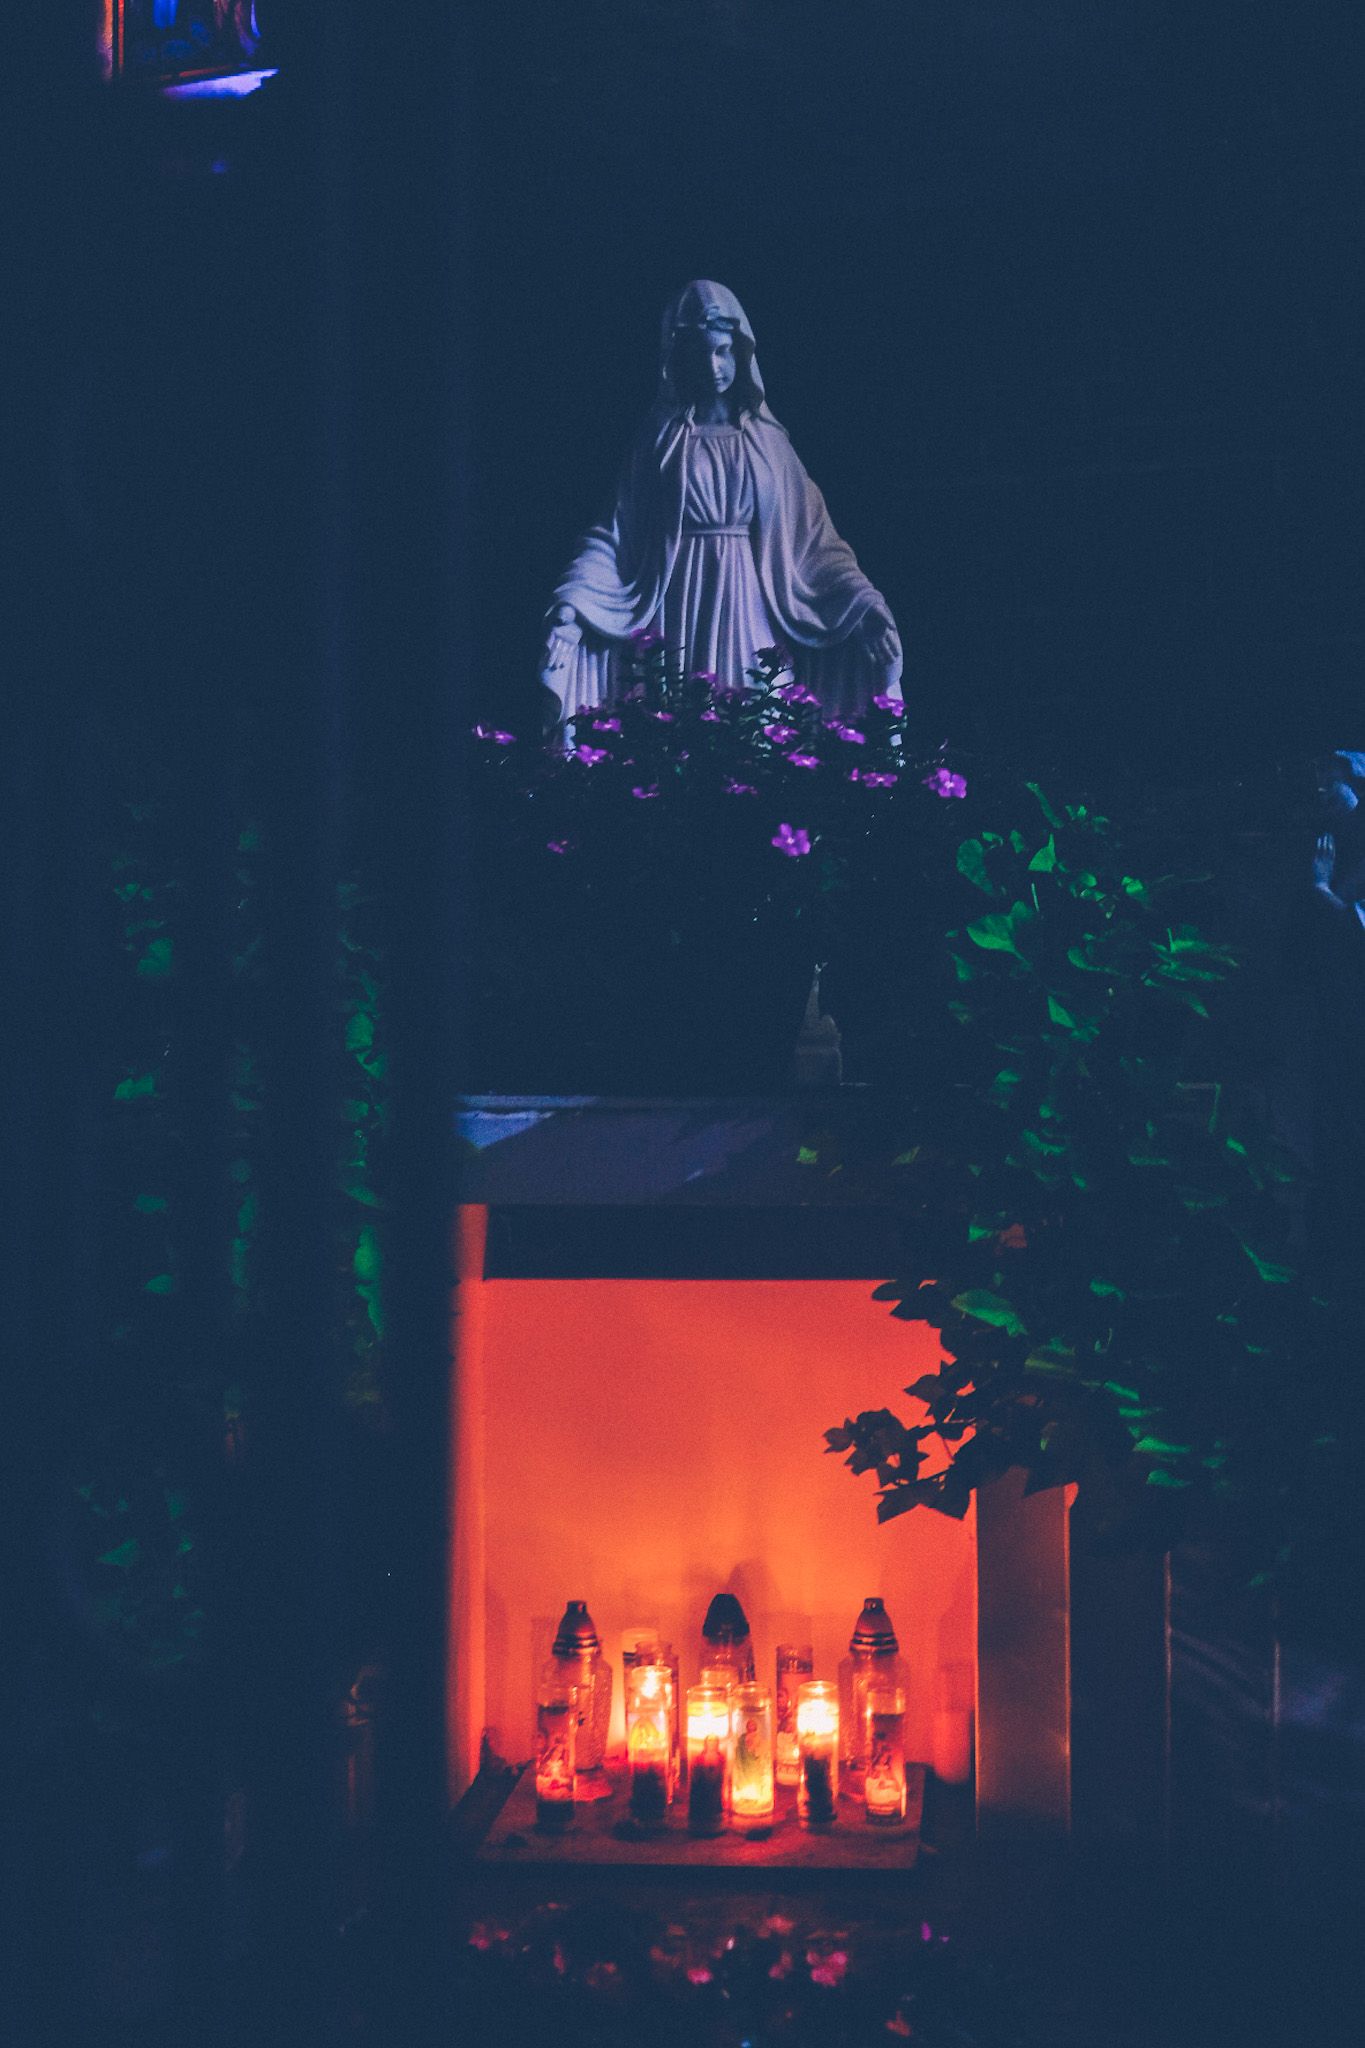 At night, a statue of Mary stands in purple light, surrounded by dark green foliage, standing on top of an altar glowing vibrantly orange, filled with candles.